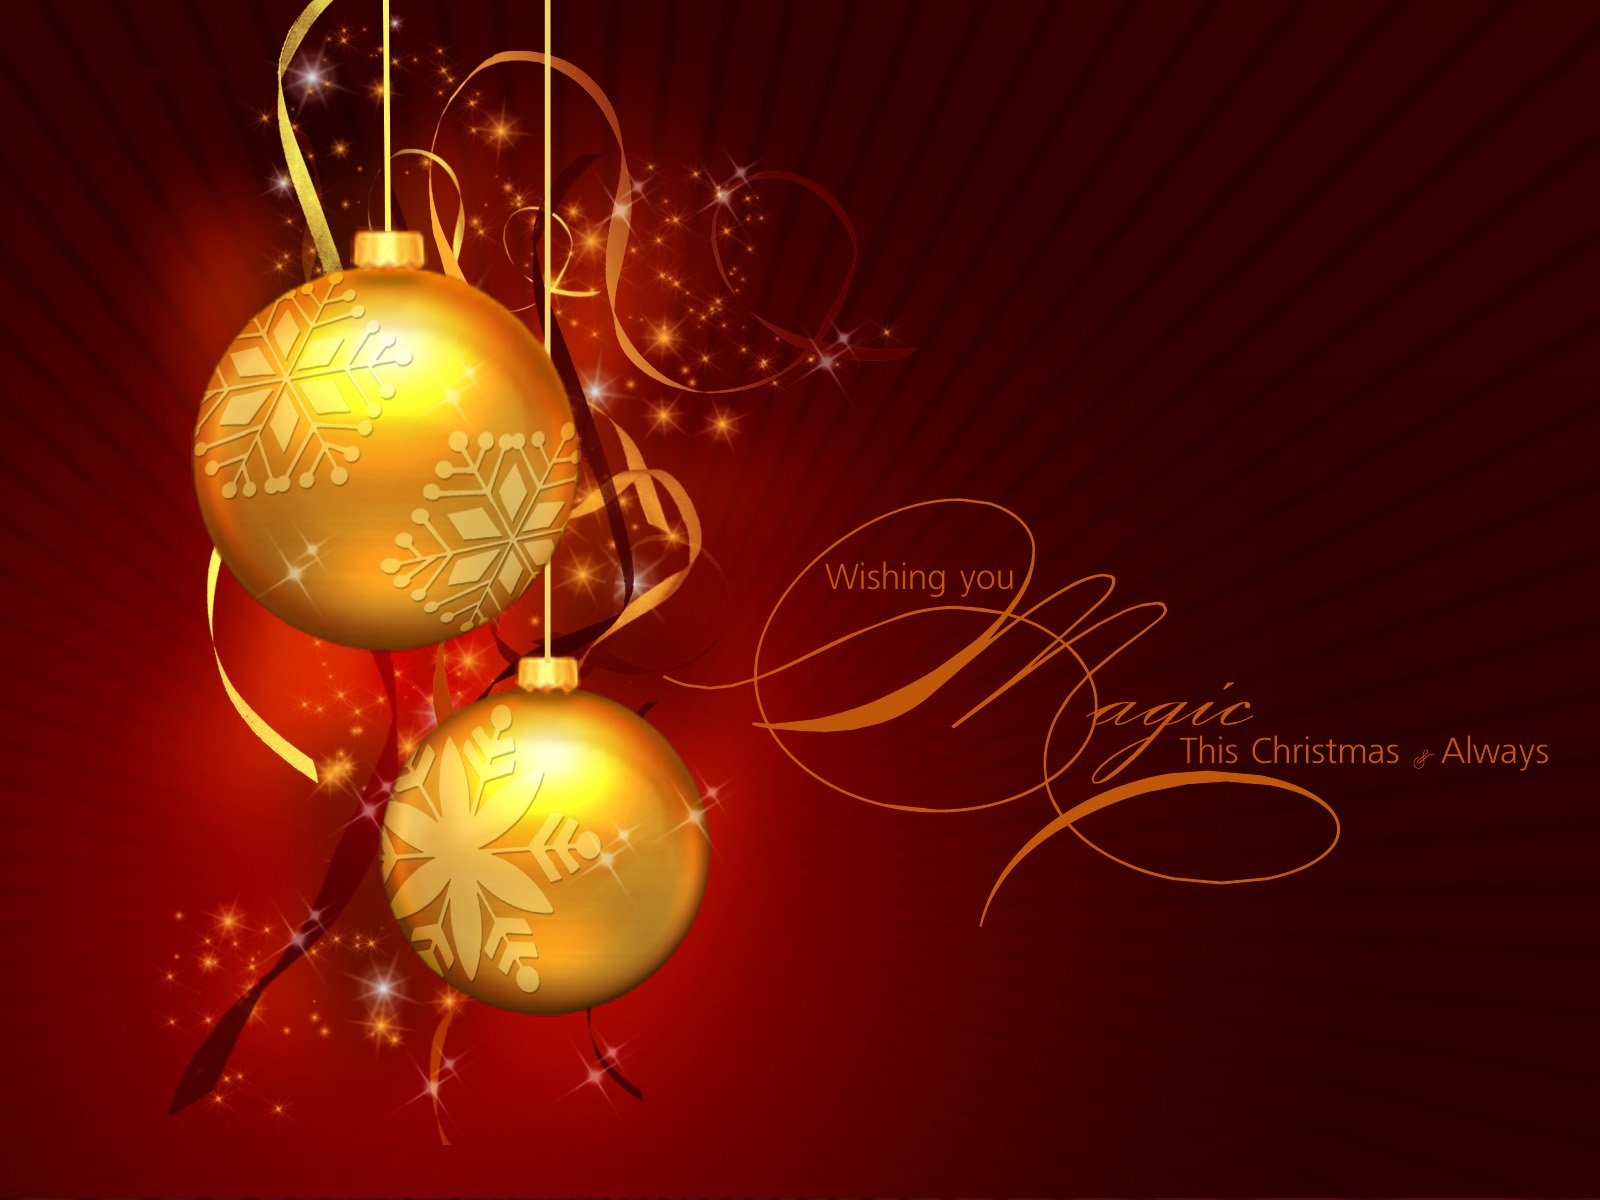 Free download Christmas Vector Decorations Wallpaper Christian Wallpaper [1600x1200] for your Desktop, Mobile & Tablet. Explore Religious Christmas Wallpaper Christmas Background. Religious Wallpaper Background Free Download, HD Christian Desktop